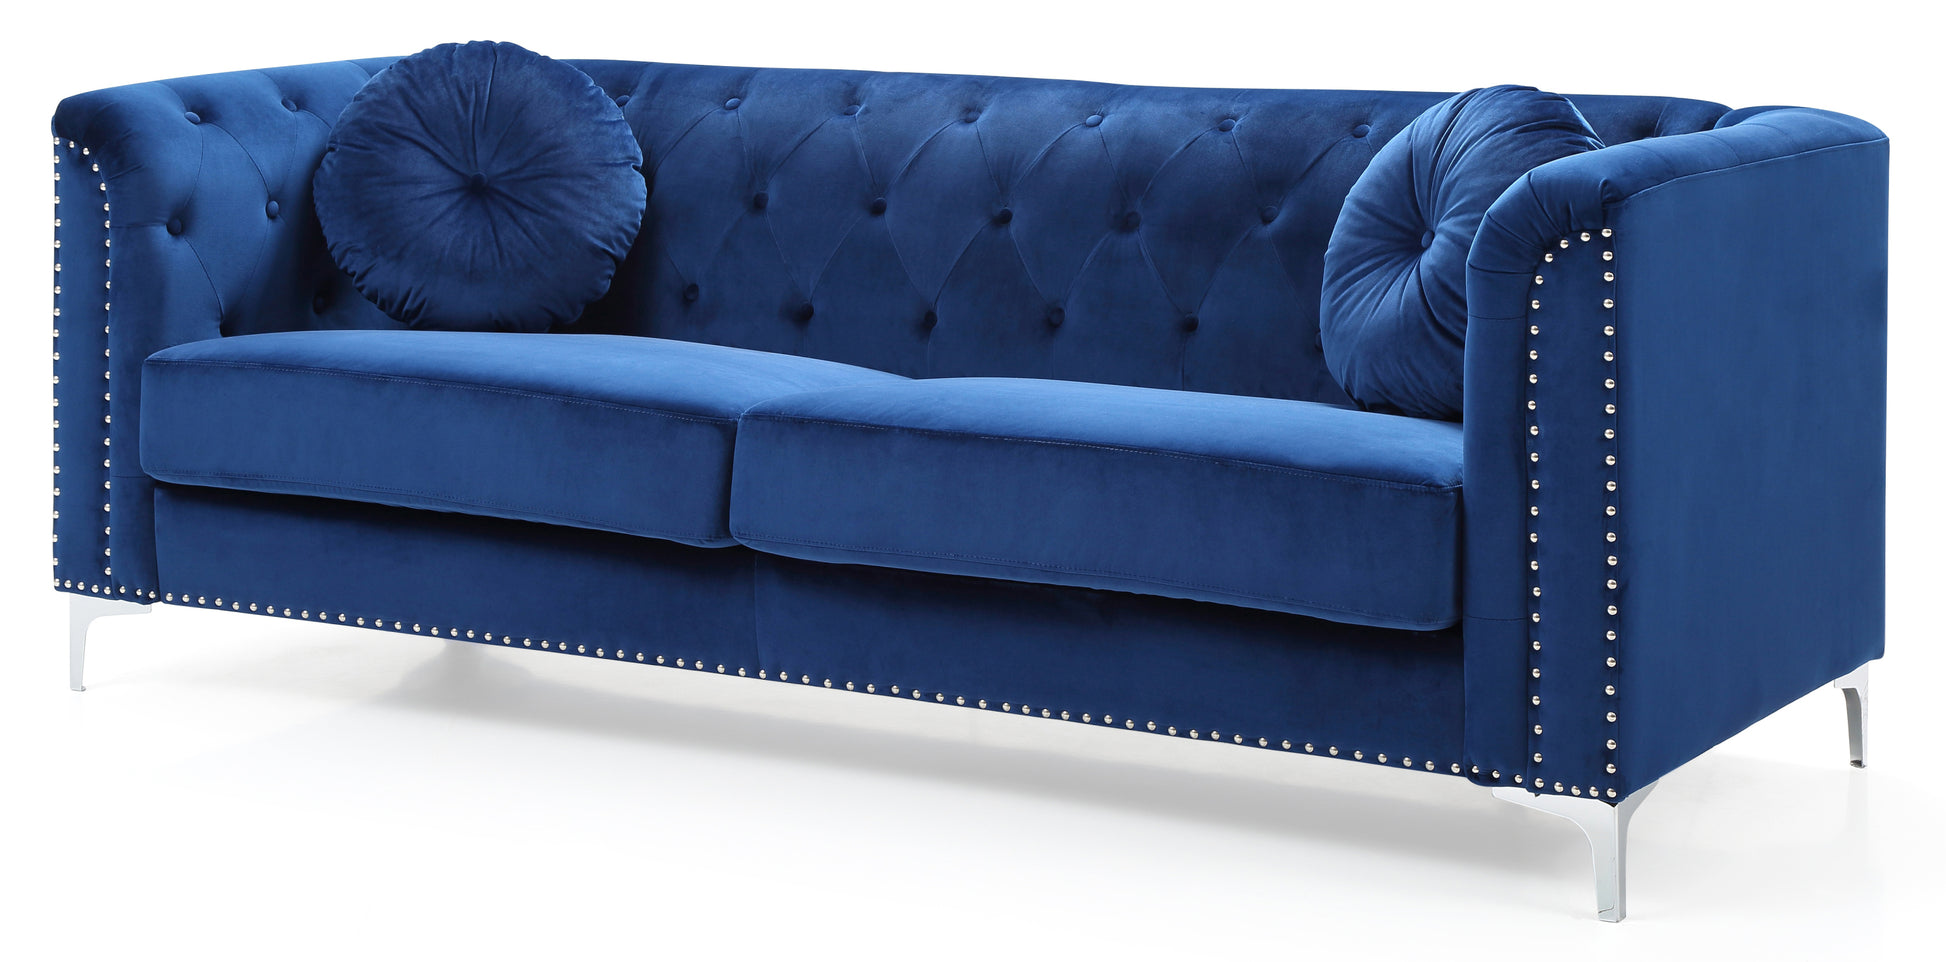 Glory Furniture Pompano G781A-S Sofa ( 2 Boxes ) , NAVY BLUE - Enova Luxe Home Store